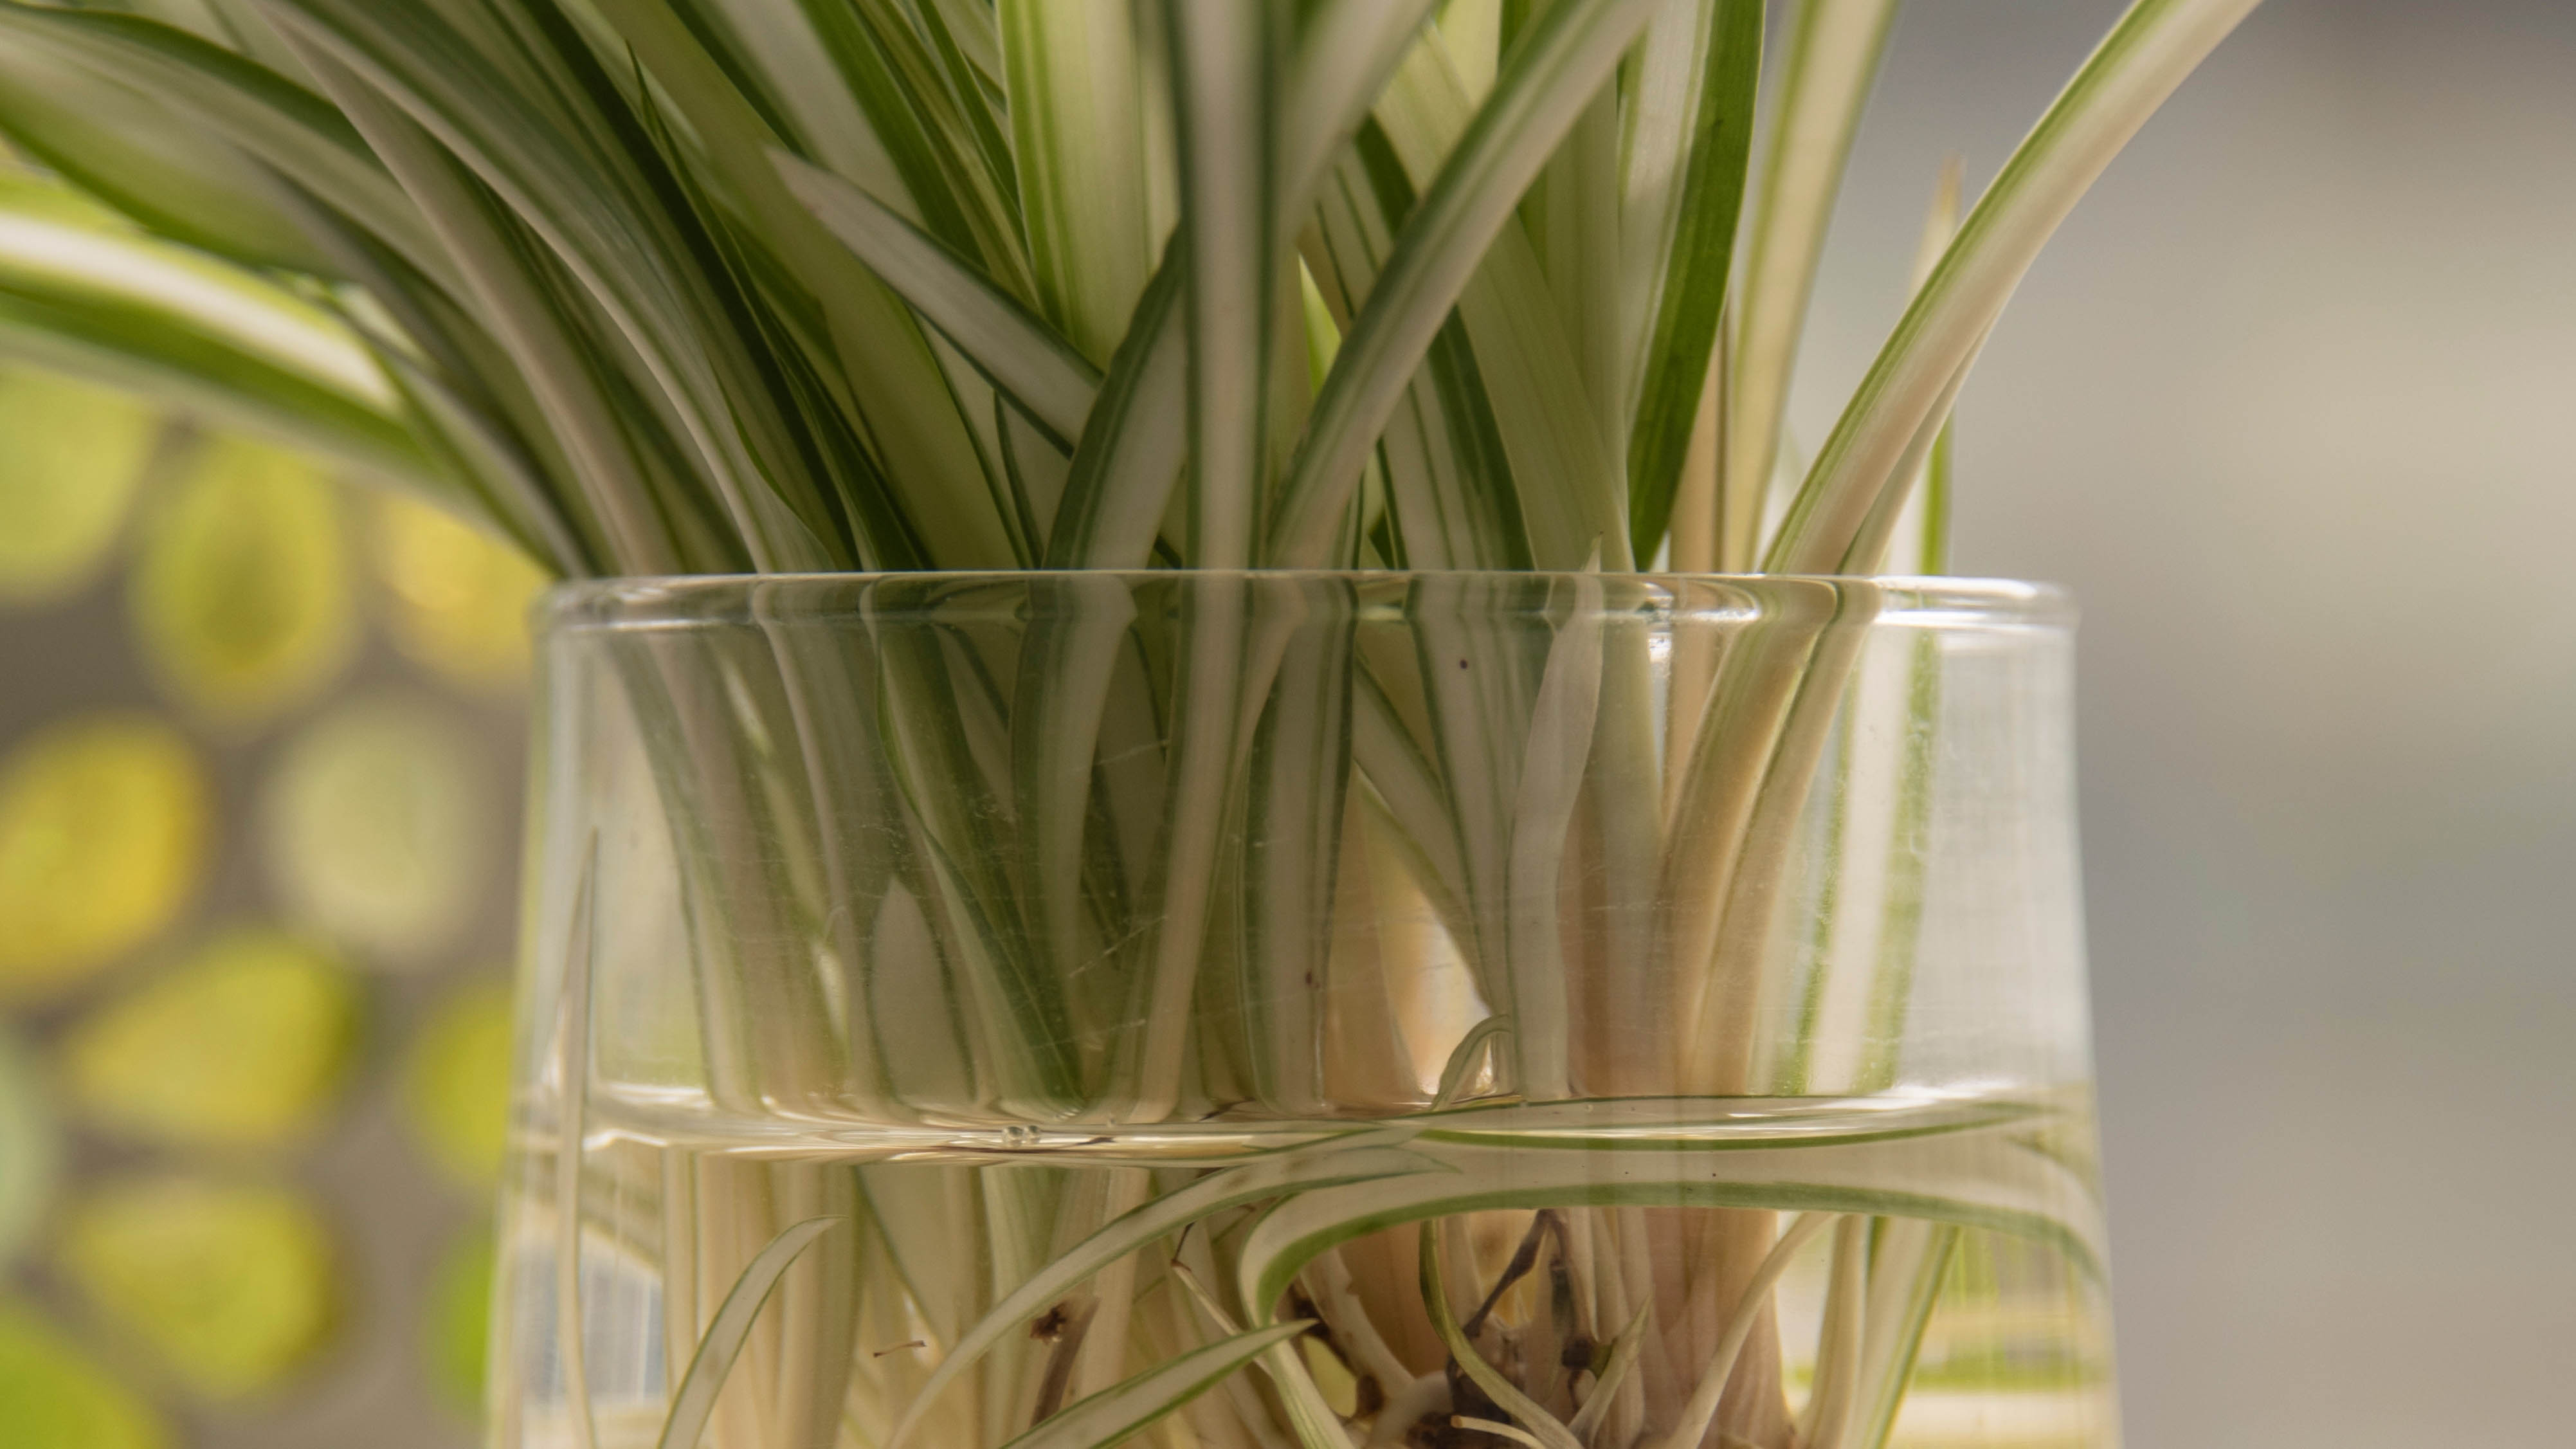 Spider plant in water